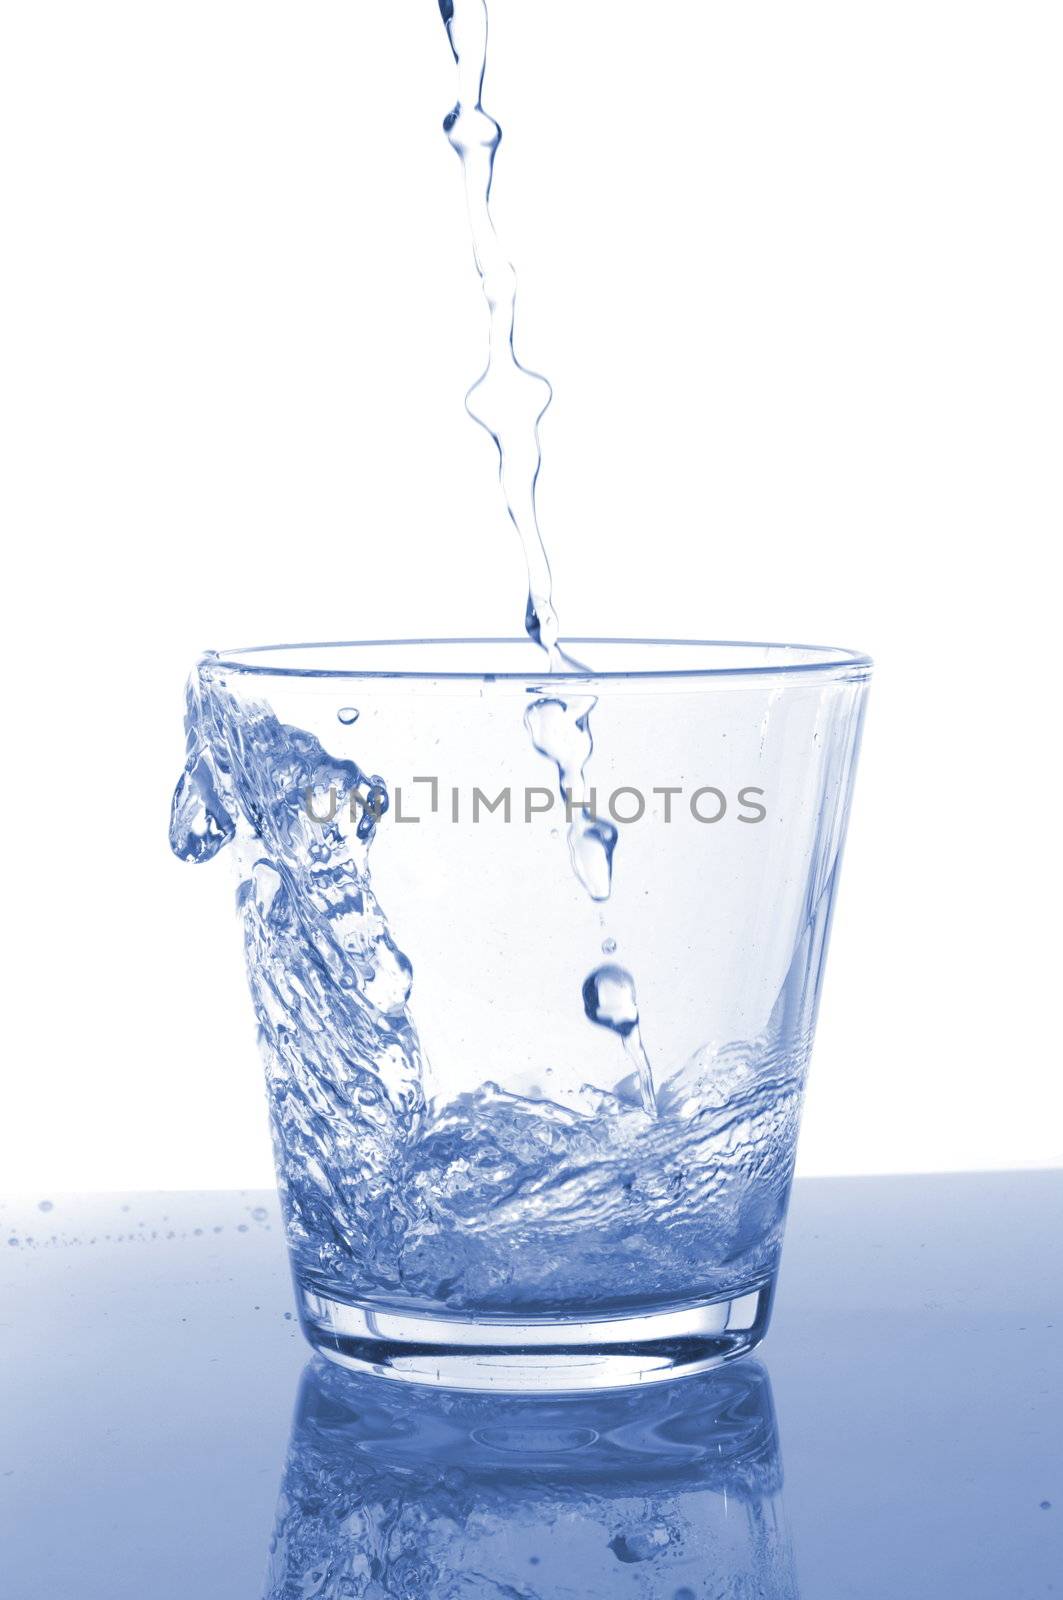 filling a glass with water by gunnar3000